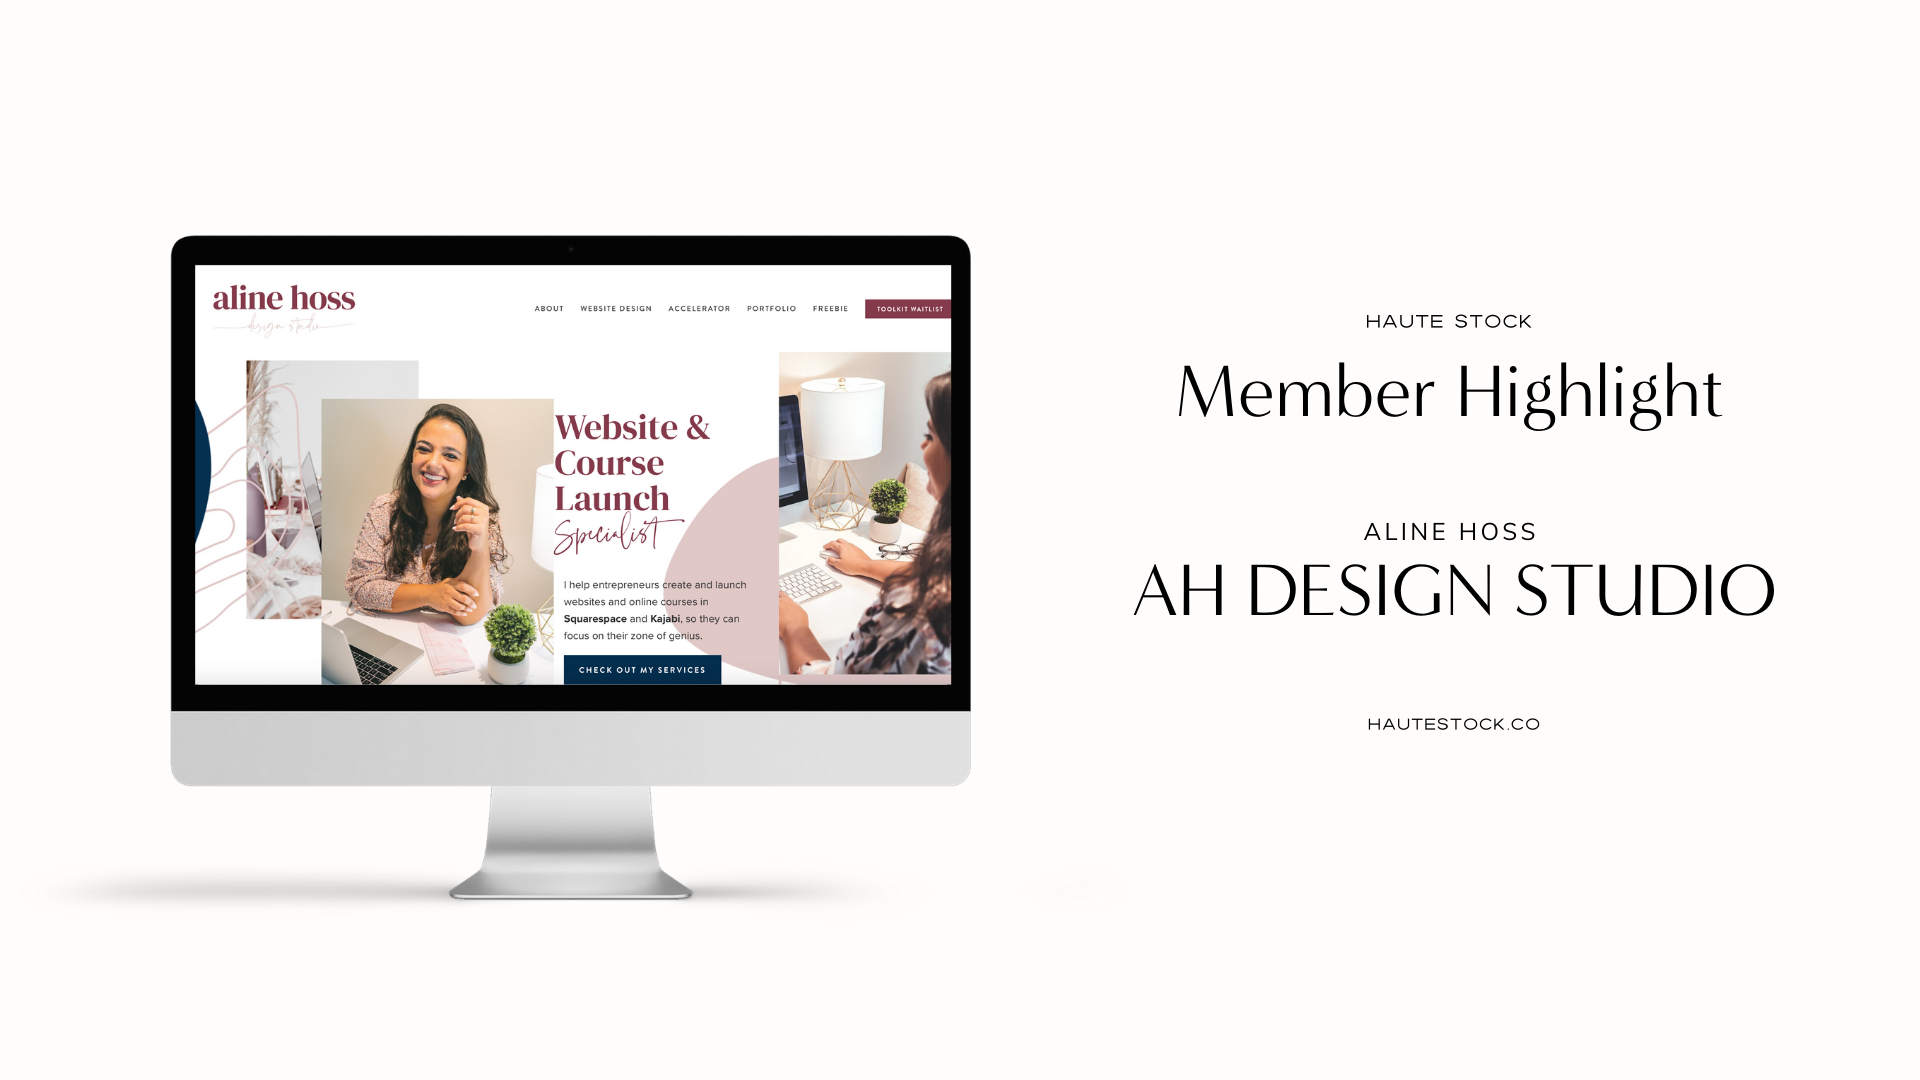 Meet Aline Hoss of AH Design Studio and learn more about her entrepreneurial journey in this Haute Stock Member Feature!